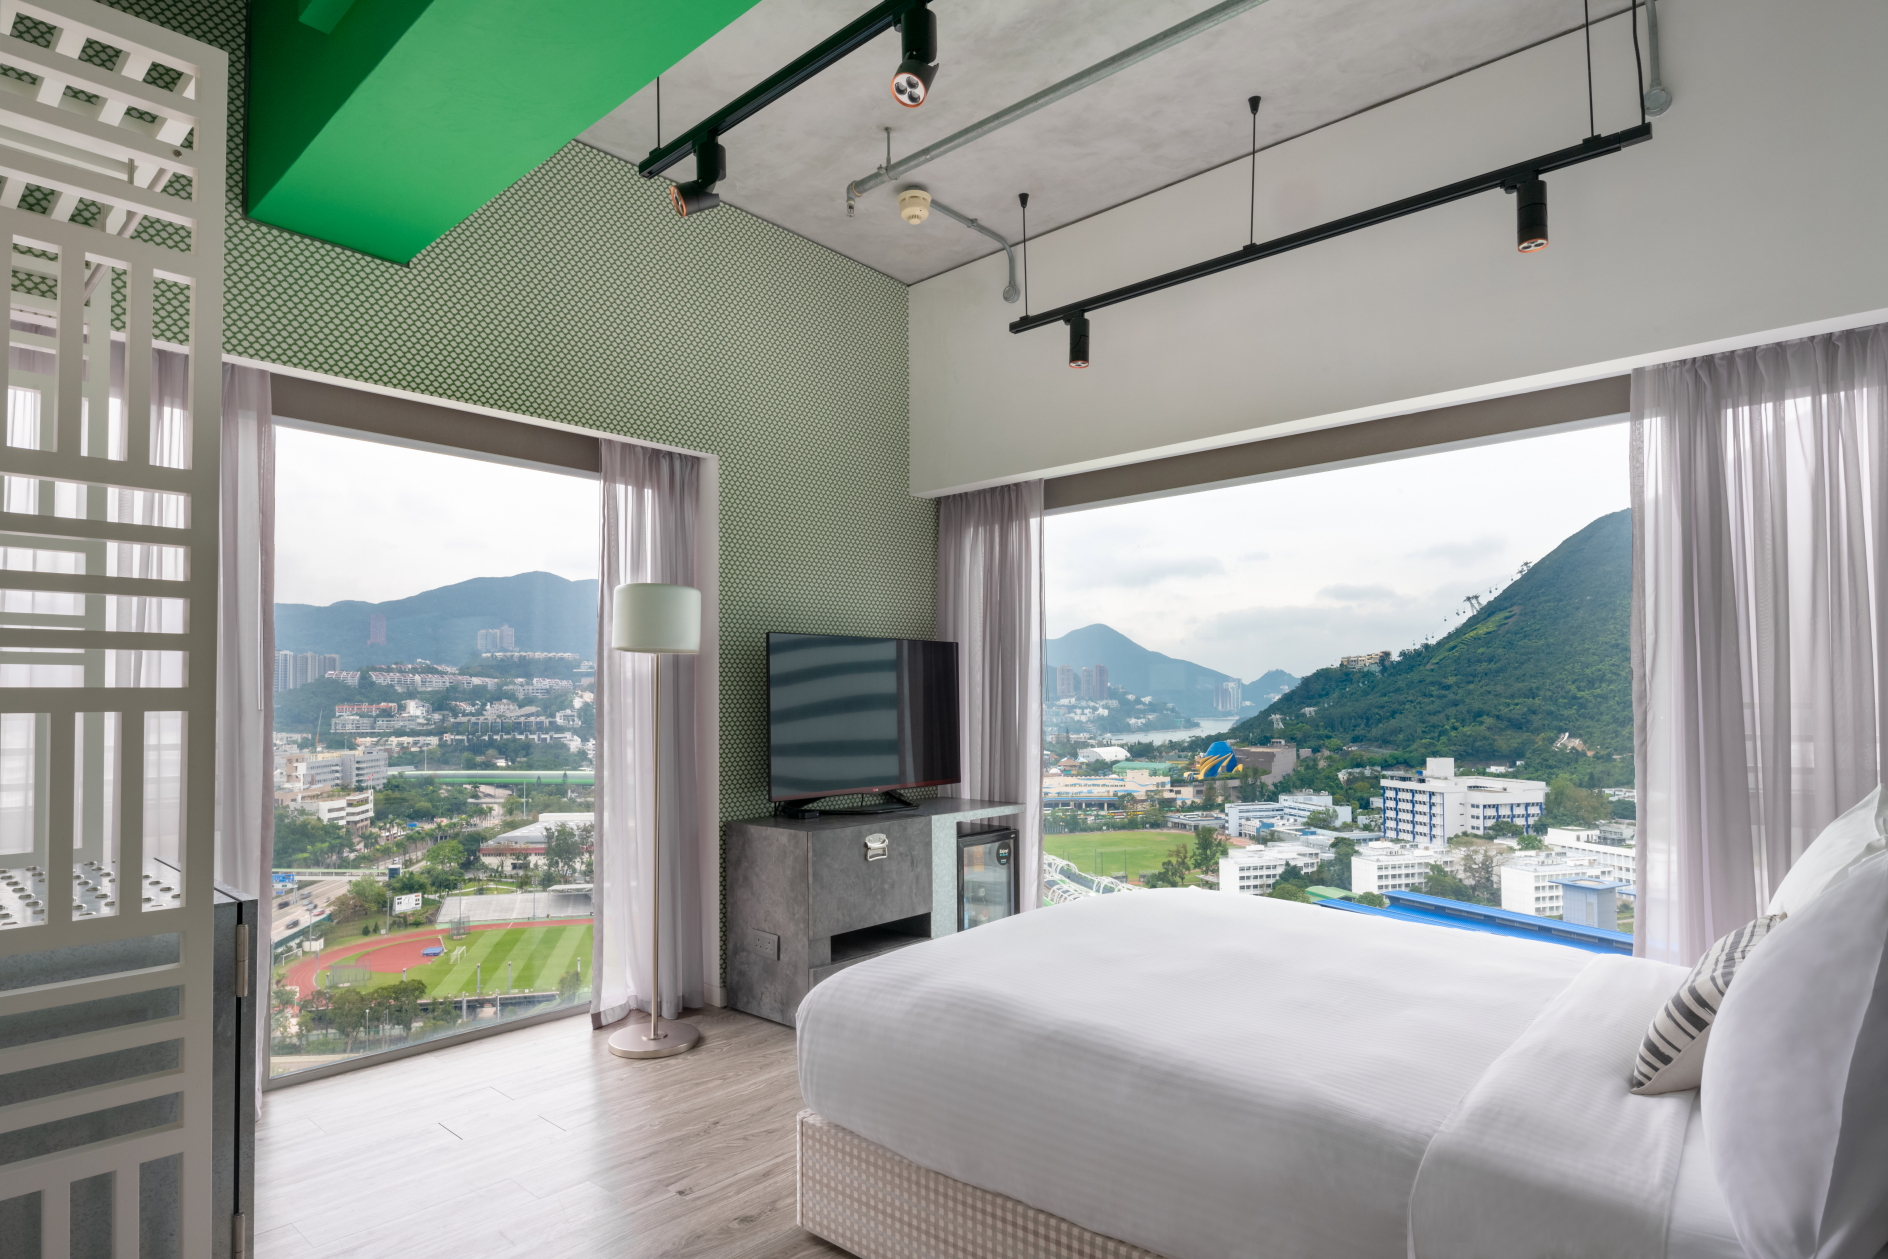 Cool Corner Room at the Ovolo Southside in Hong Kong. Click to enlarge.